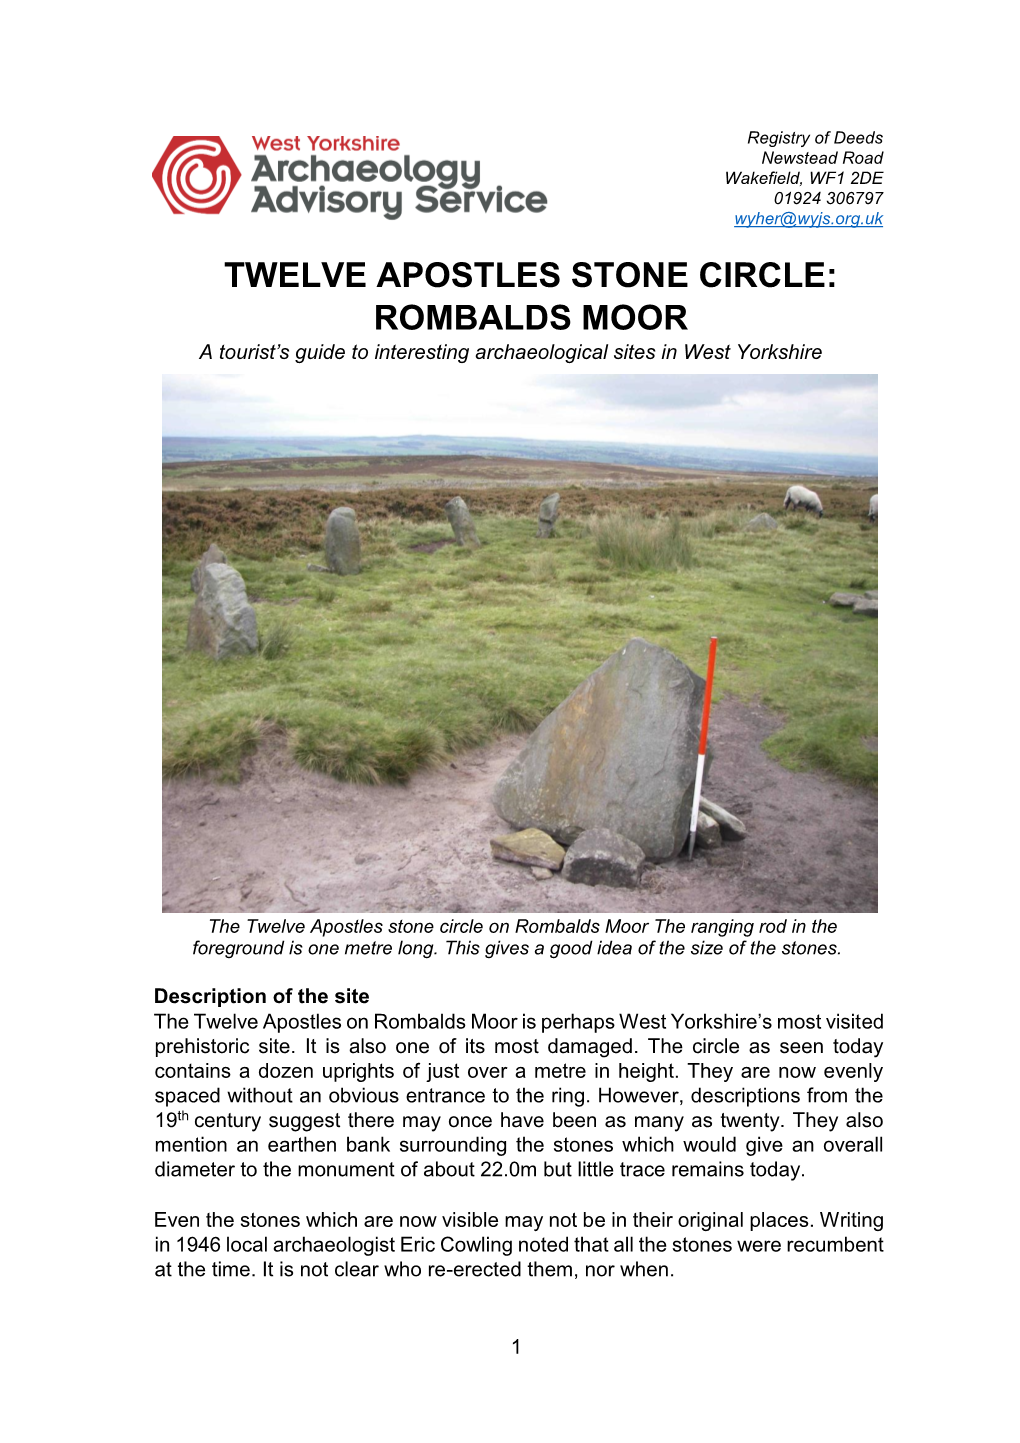 TWELVE APOSTLES STONE CIRCLE: ROMBALDS MOOR a Tourist’S Guide to Interesting Archaeological Sites in West Yorkshire